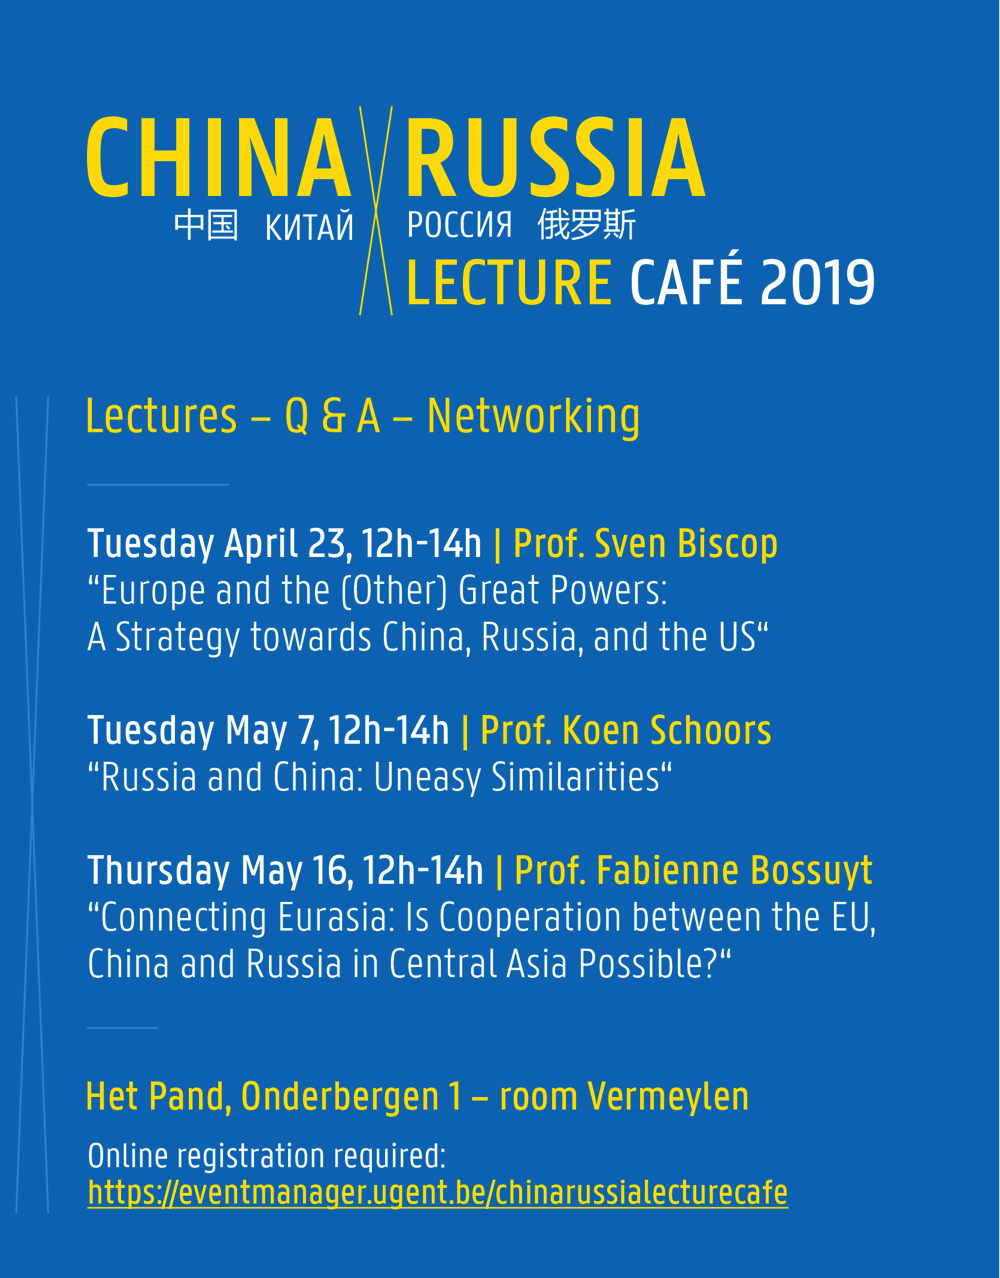 Affiche.  Gent. Lecture Café 2019. Connecting Eurasia - is cooperatoion between the EU, China and Russia in Central Asia Possible. 2019-05-16